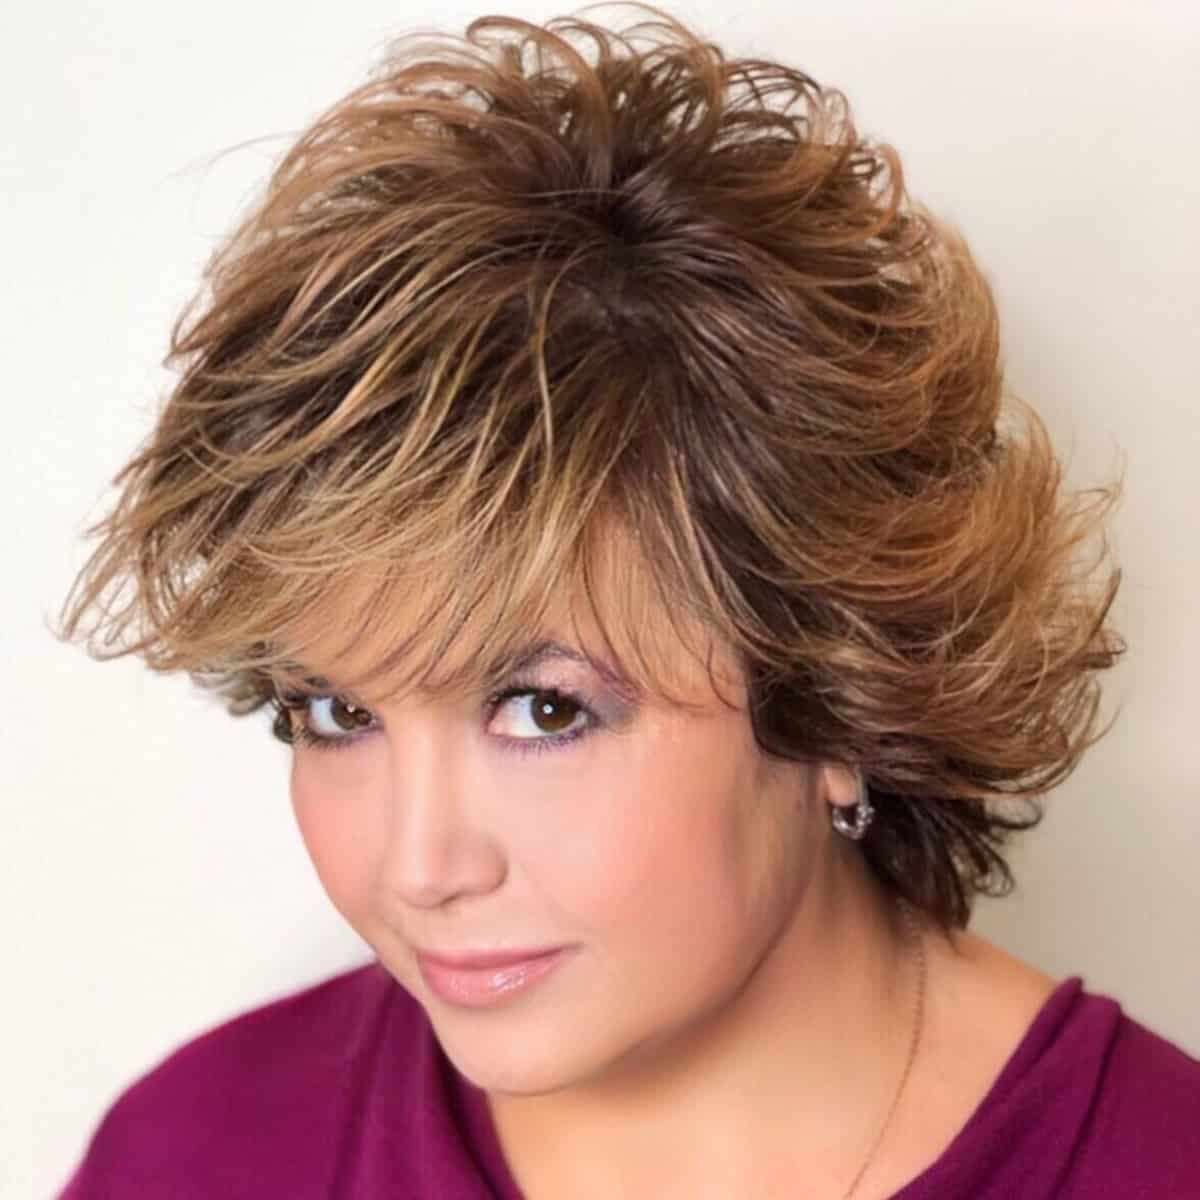 Short sassy cut with feathered layers